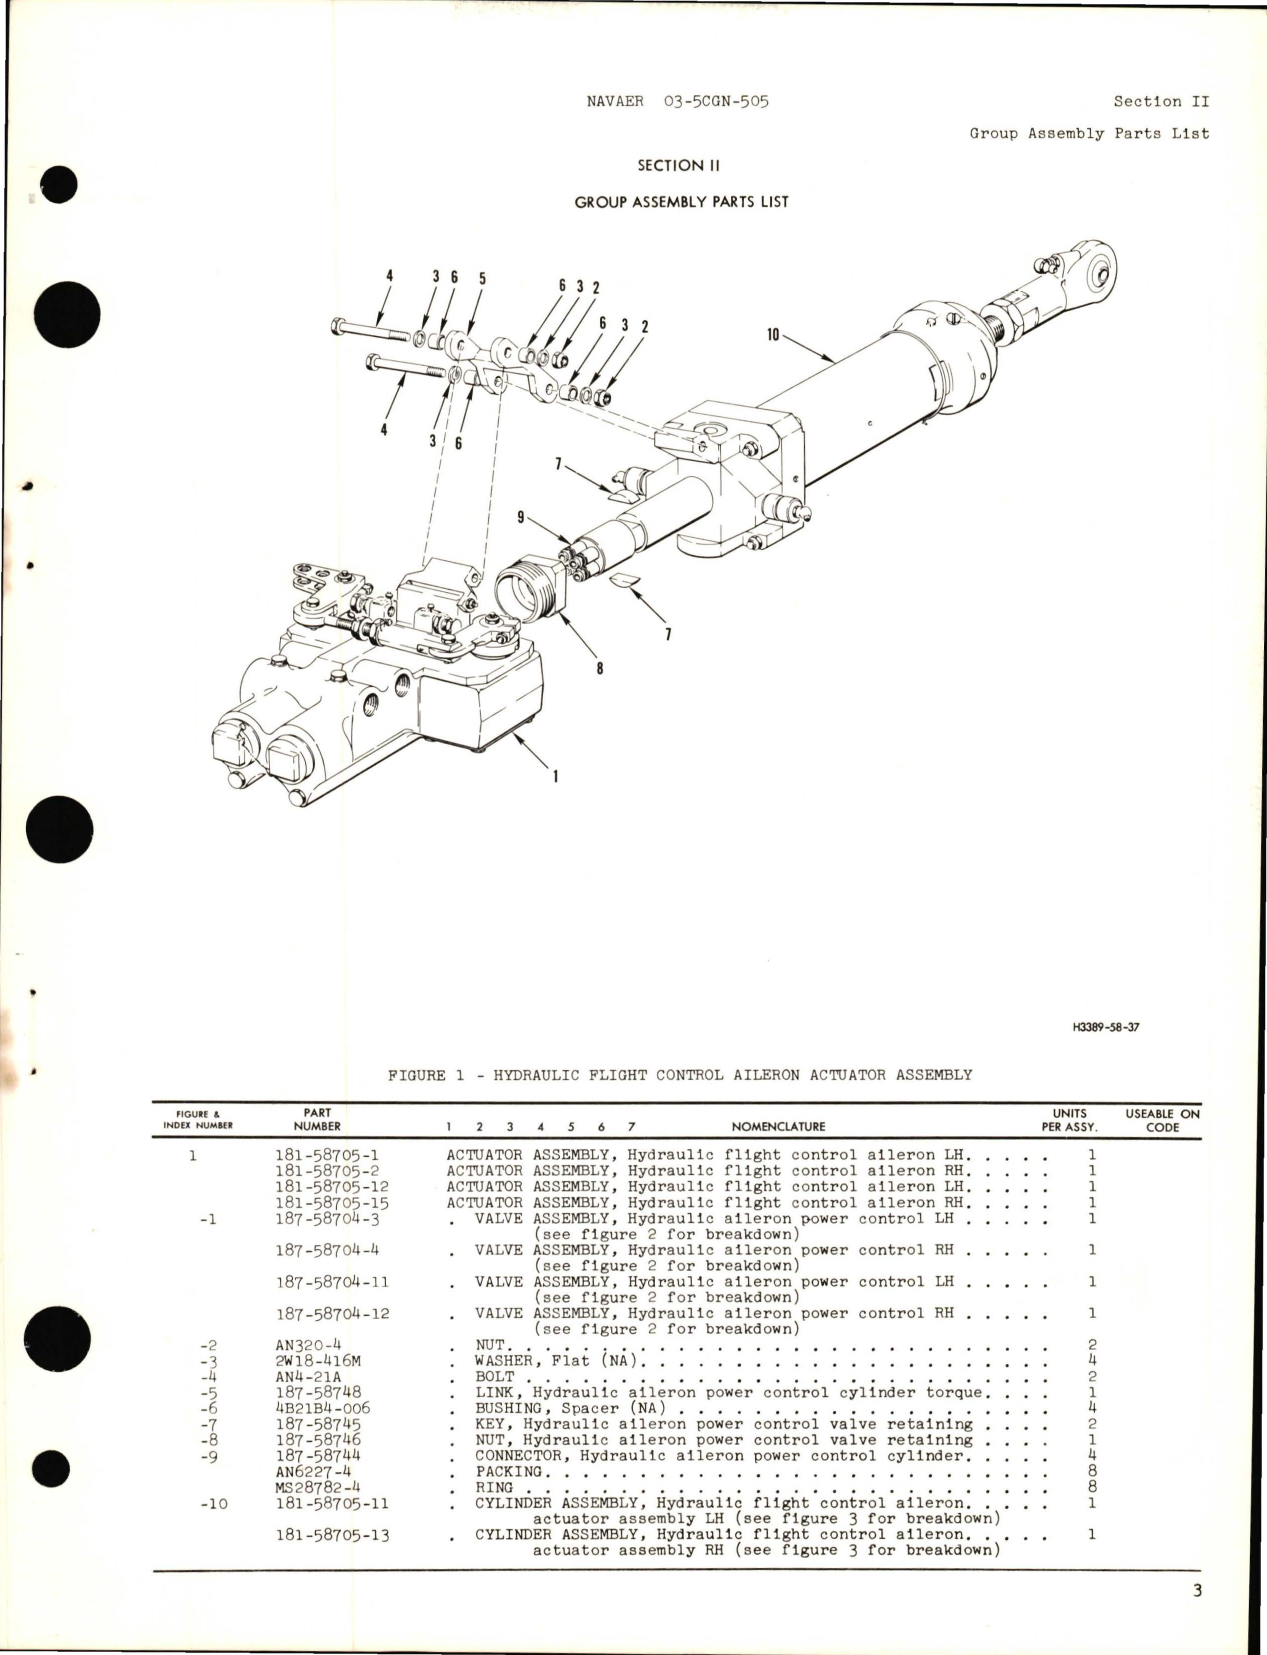 Sample page 5 from AirCorps Library document: Parts Breakdown for Hydraulic Flight Control Aileron Actuator Assembly - Part 181-58705 Series 